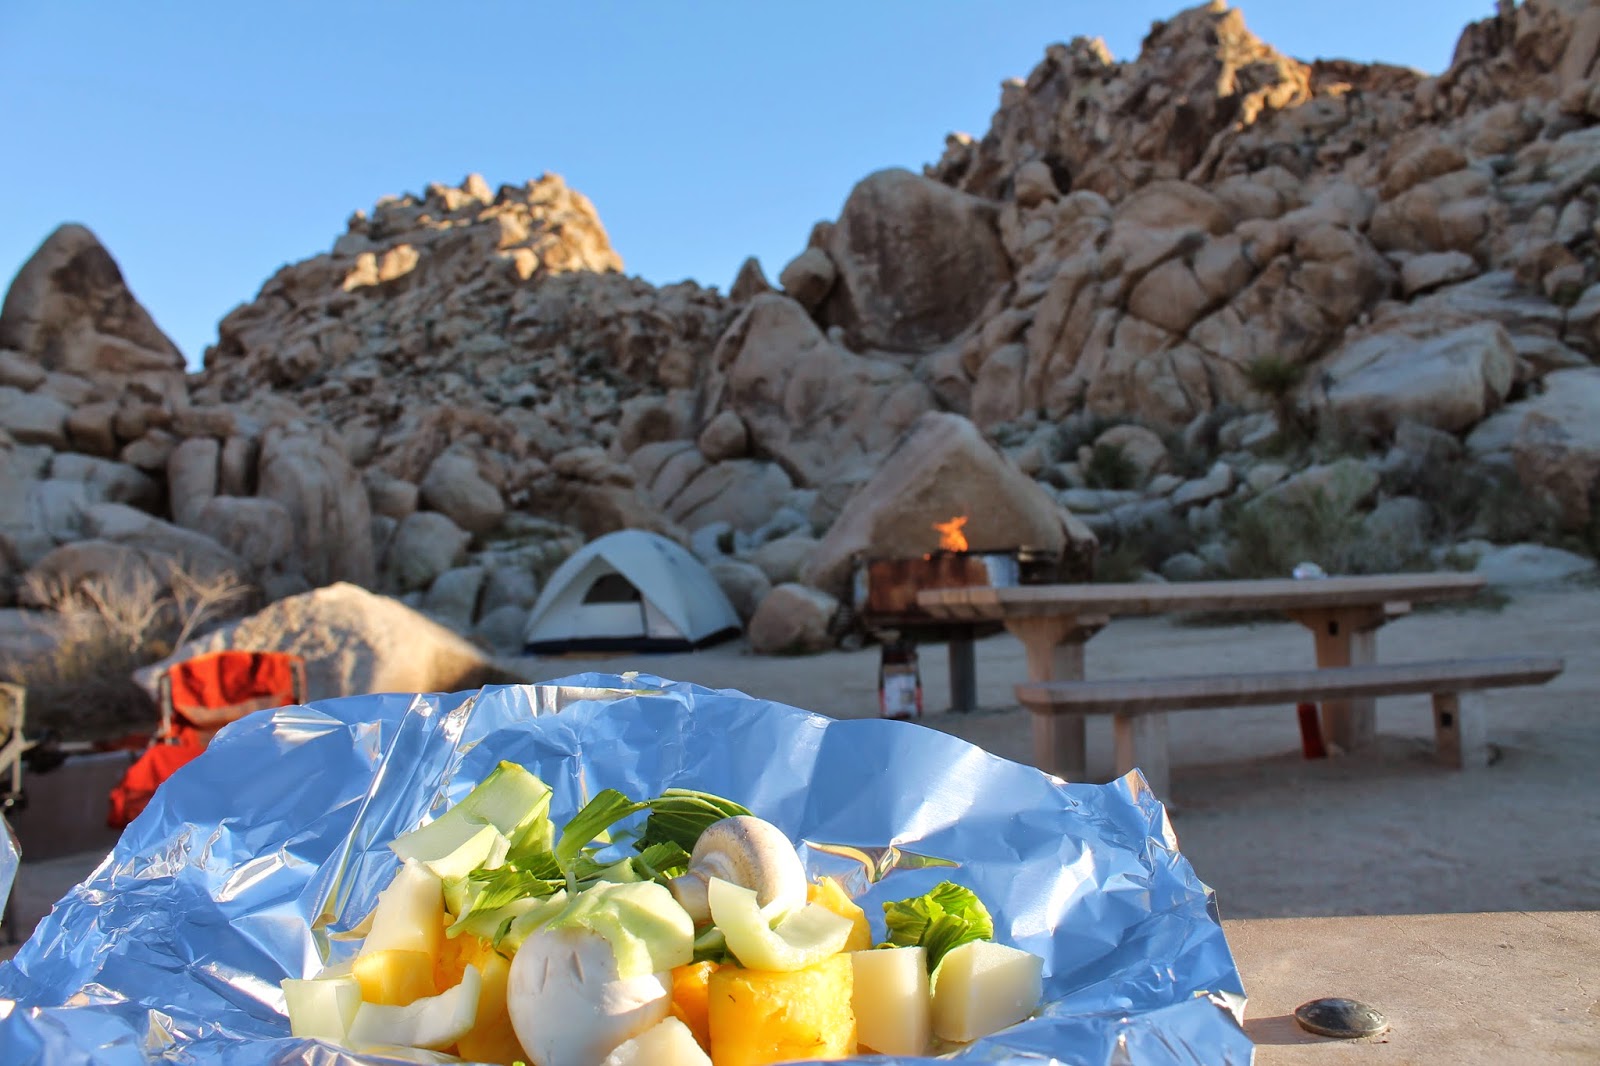 Paleo Camping Recipes Breakfast, Lunch, Dinner, and Dessert